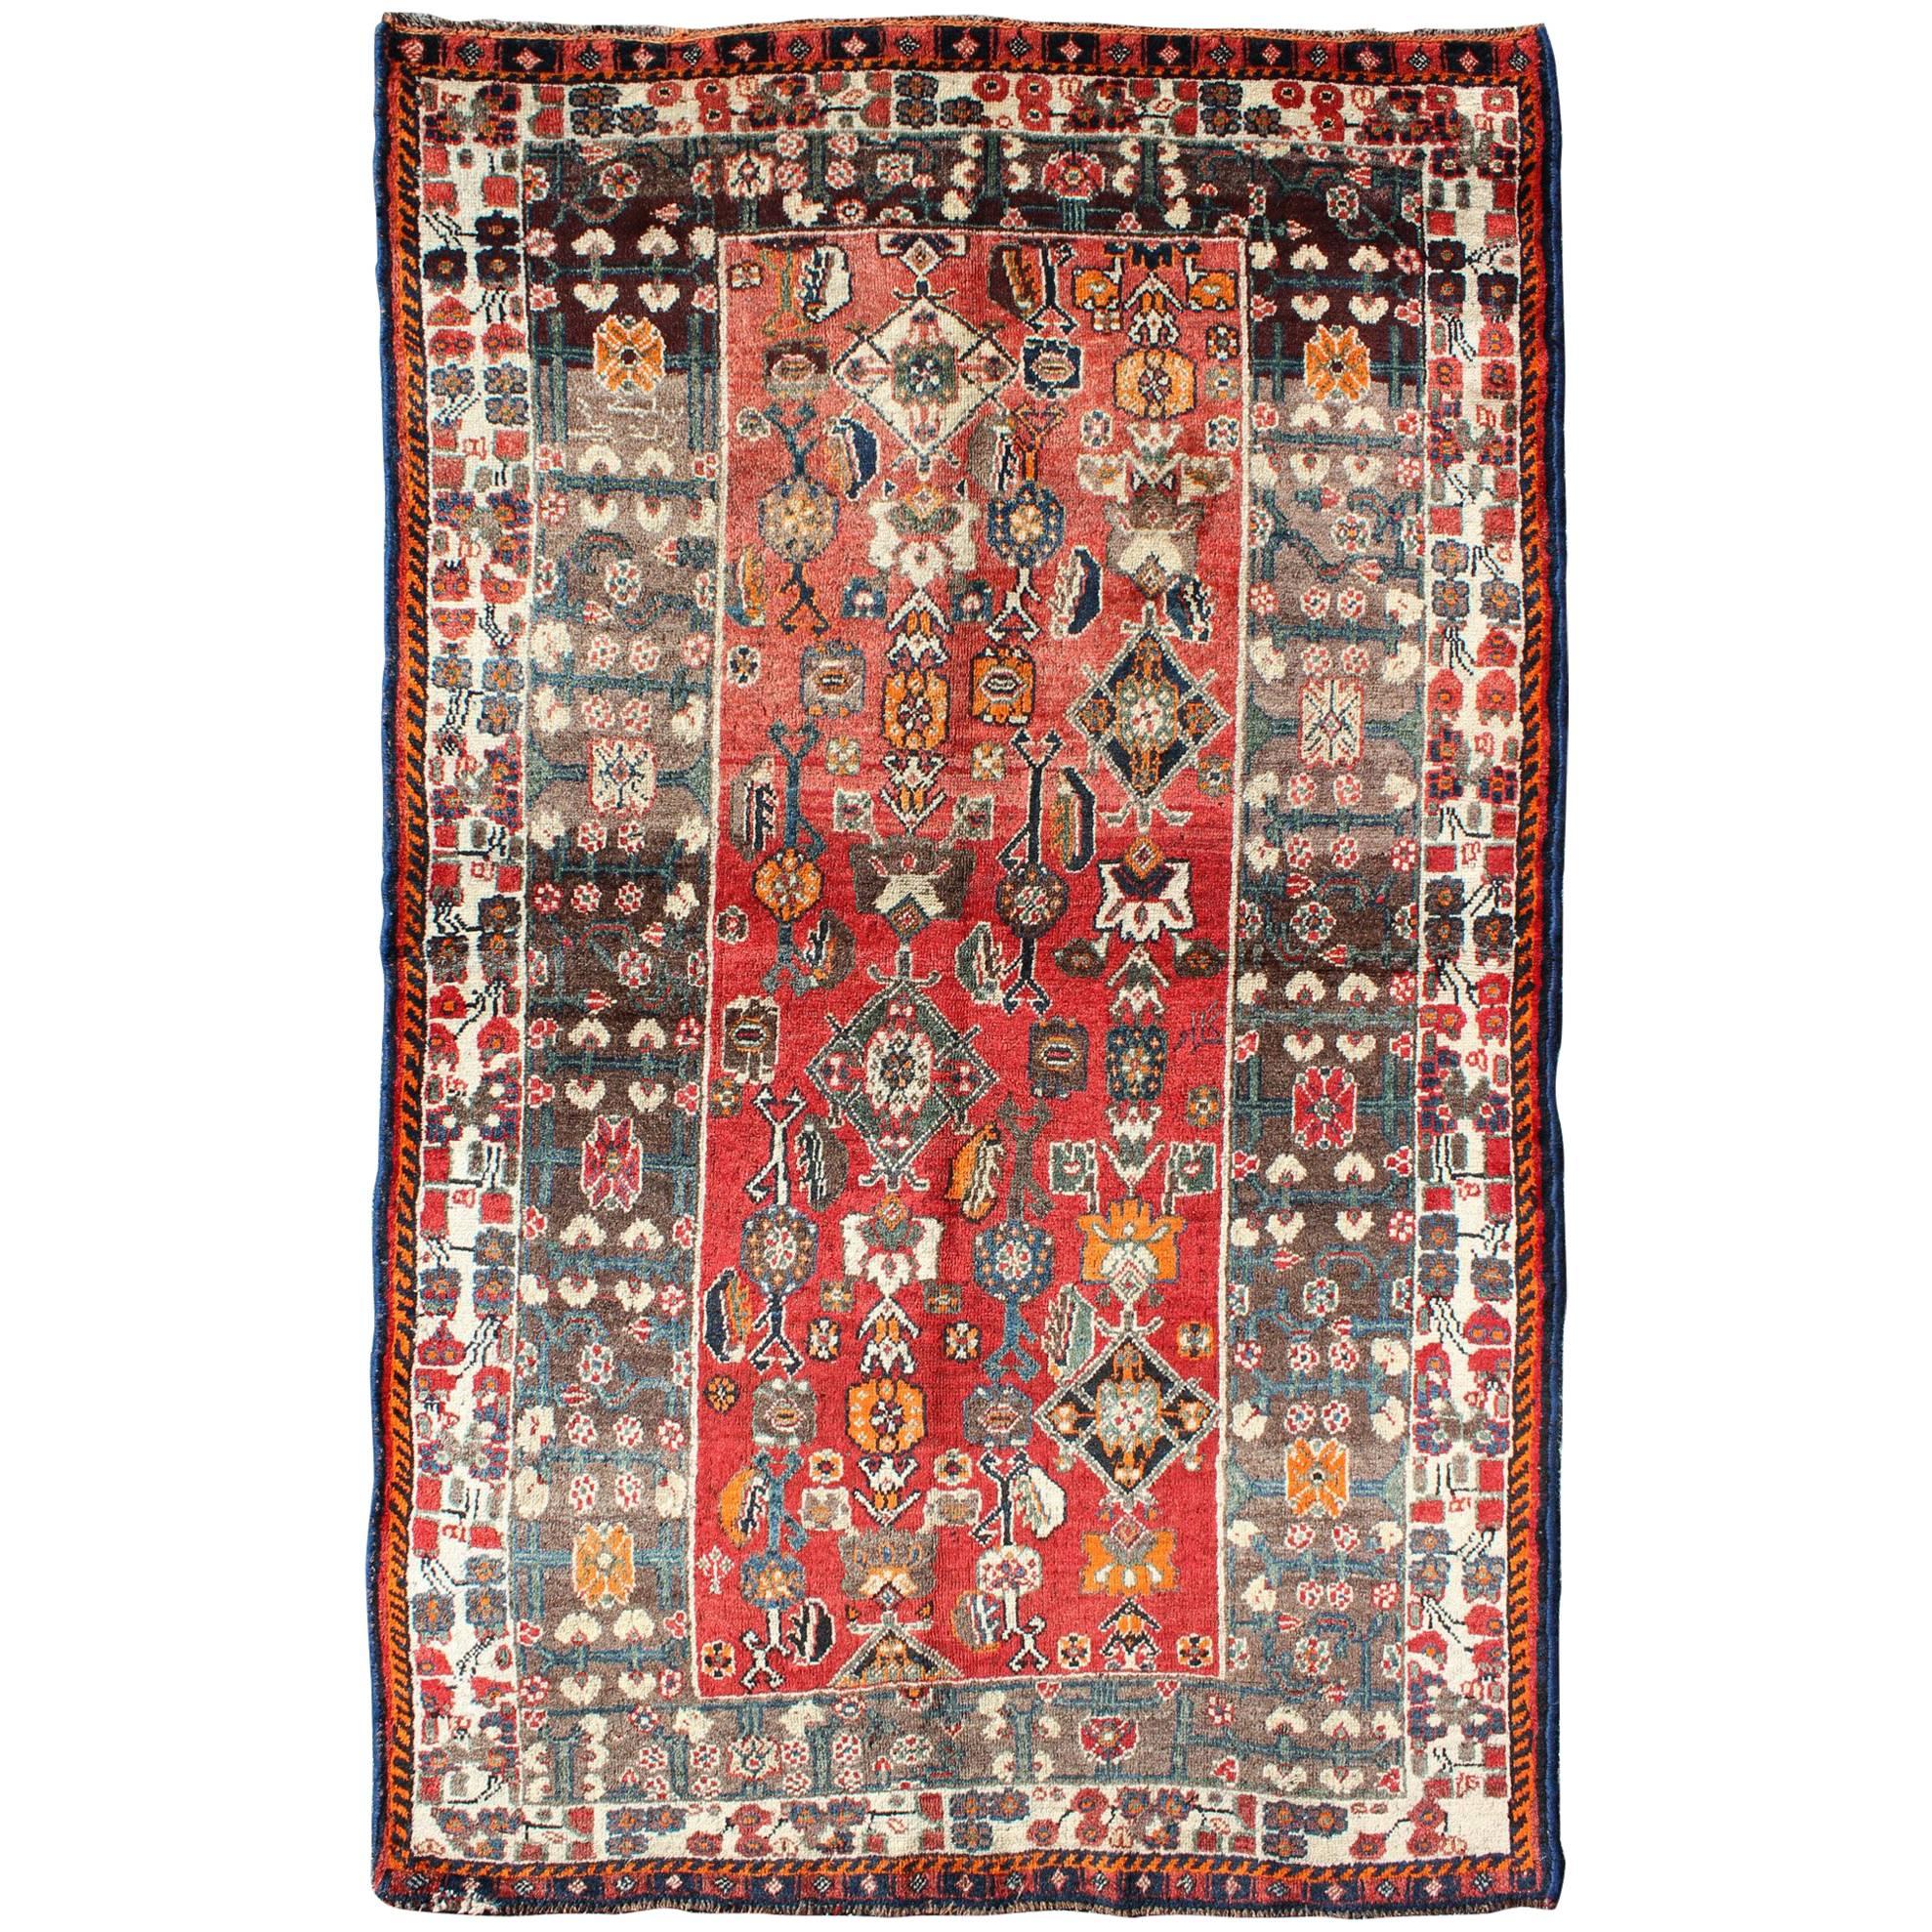 Red Background Shiraz Persian Rug with Sub-Geometric Motifs Throughout